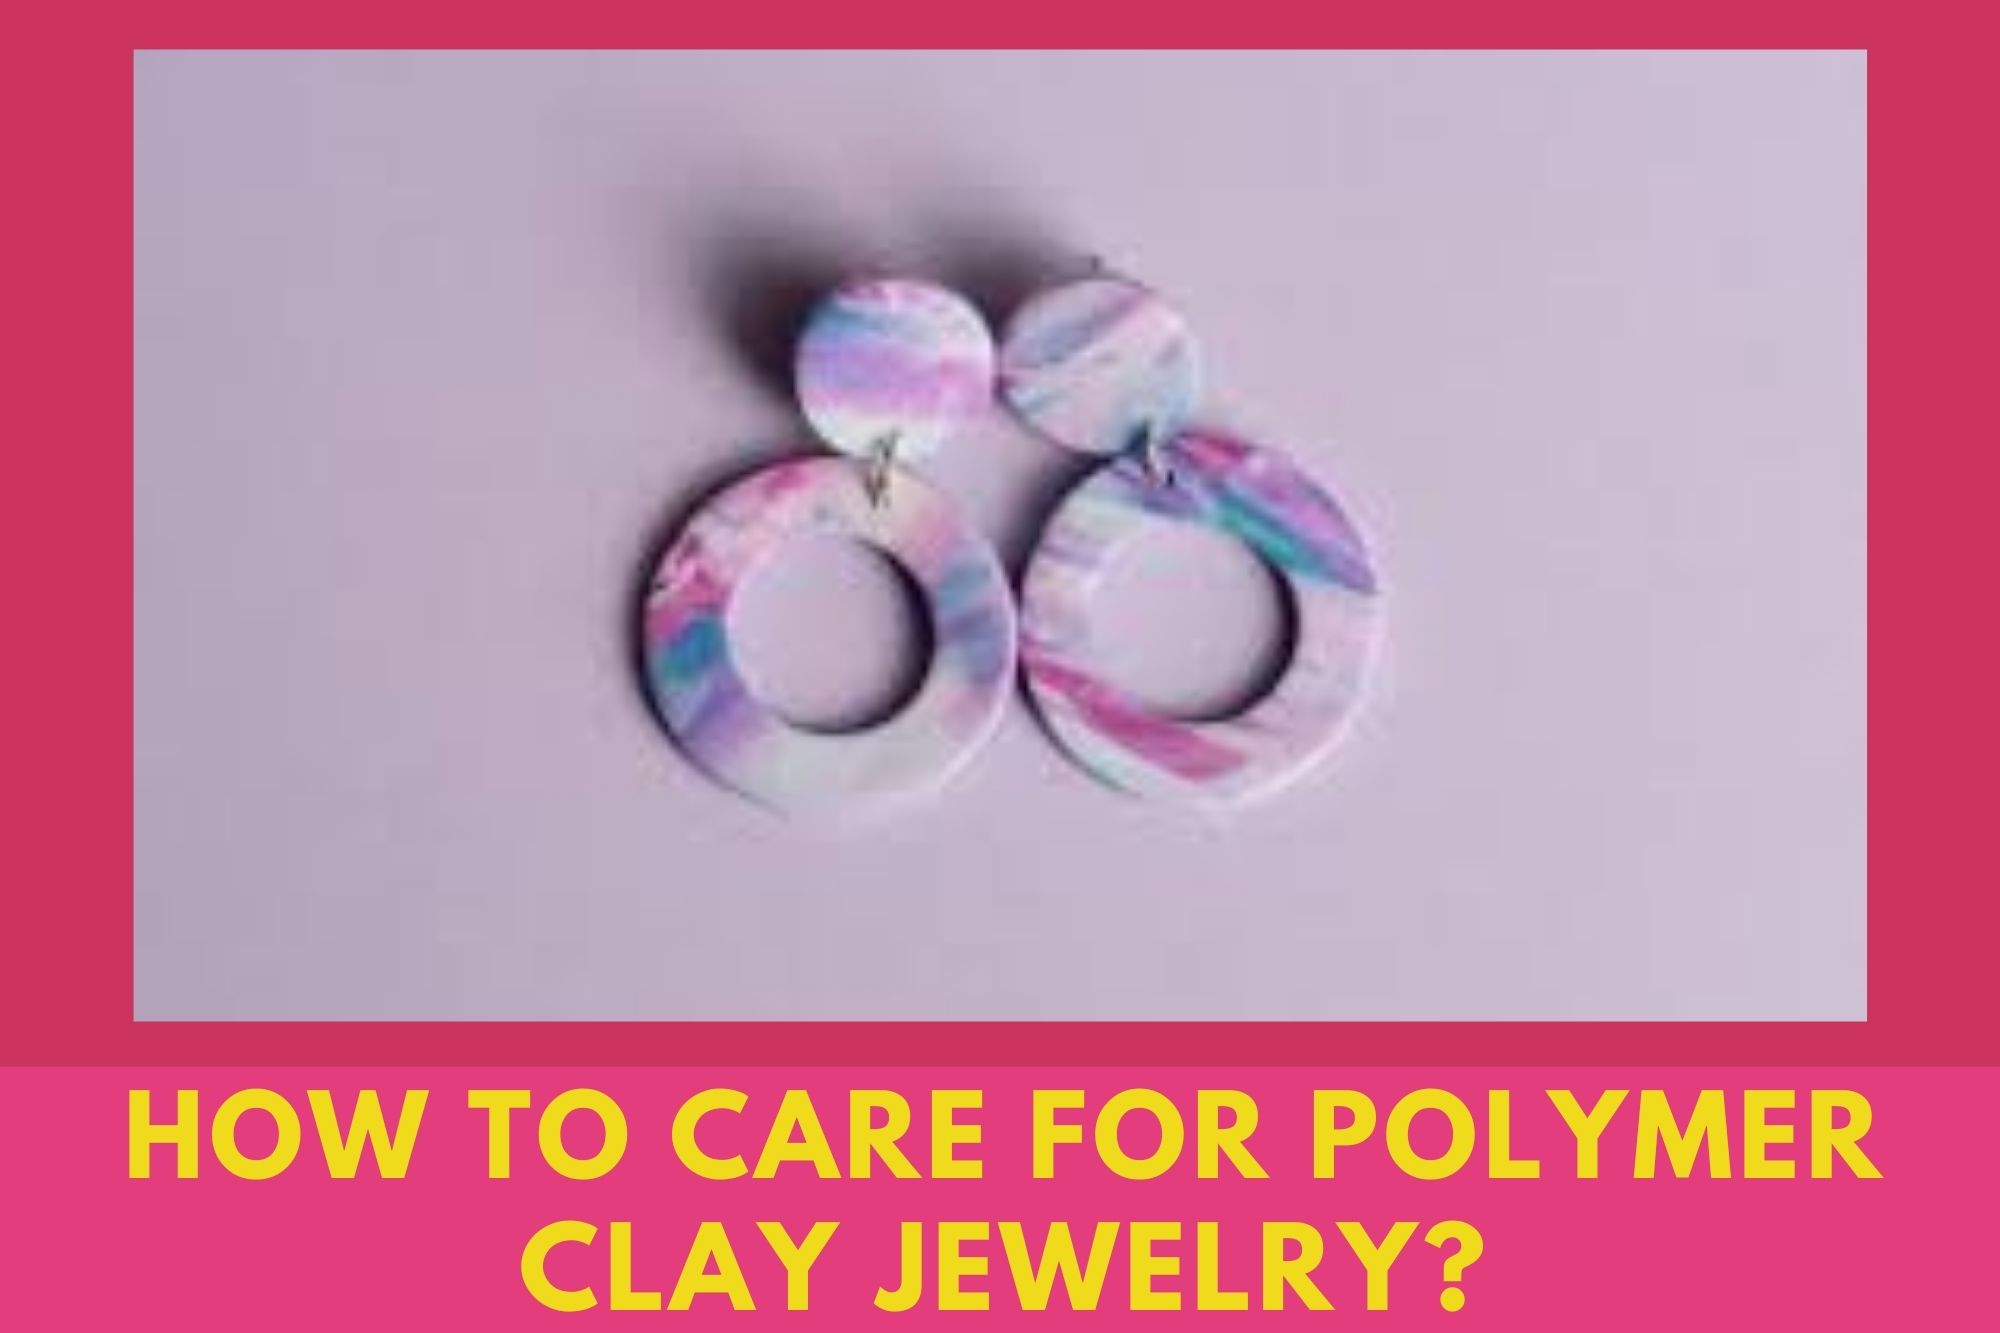 How To Care For Polymer Clay Jewelry?